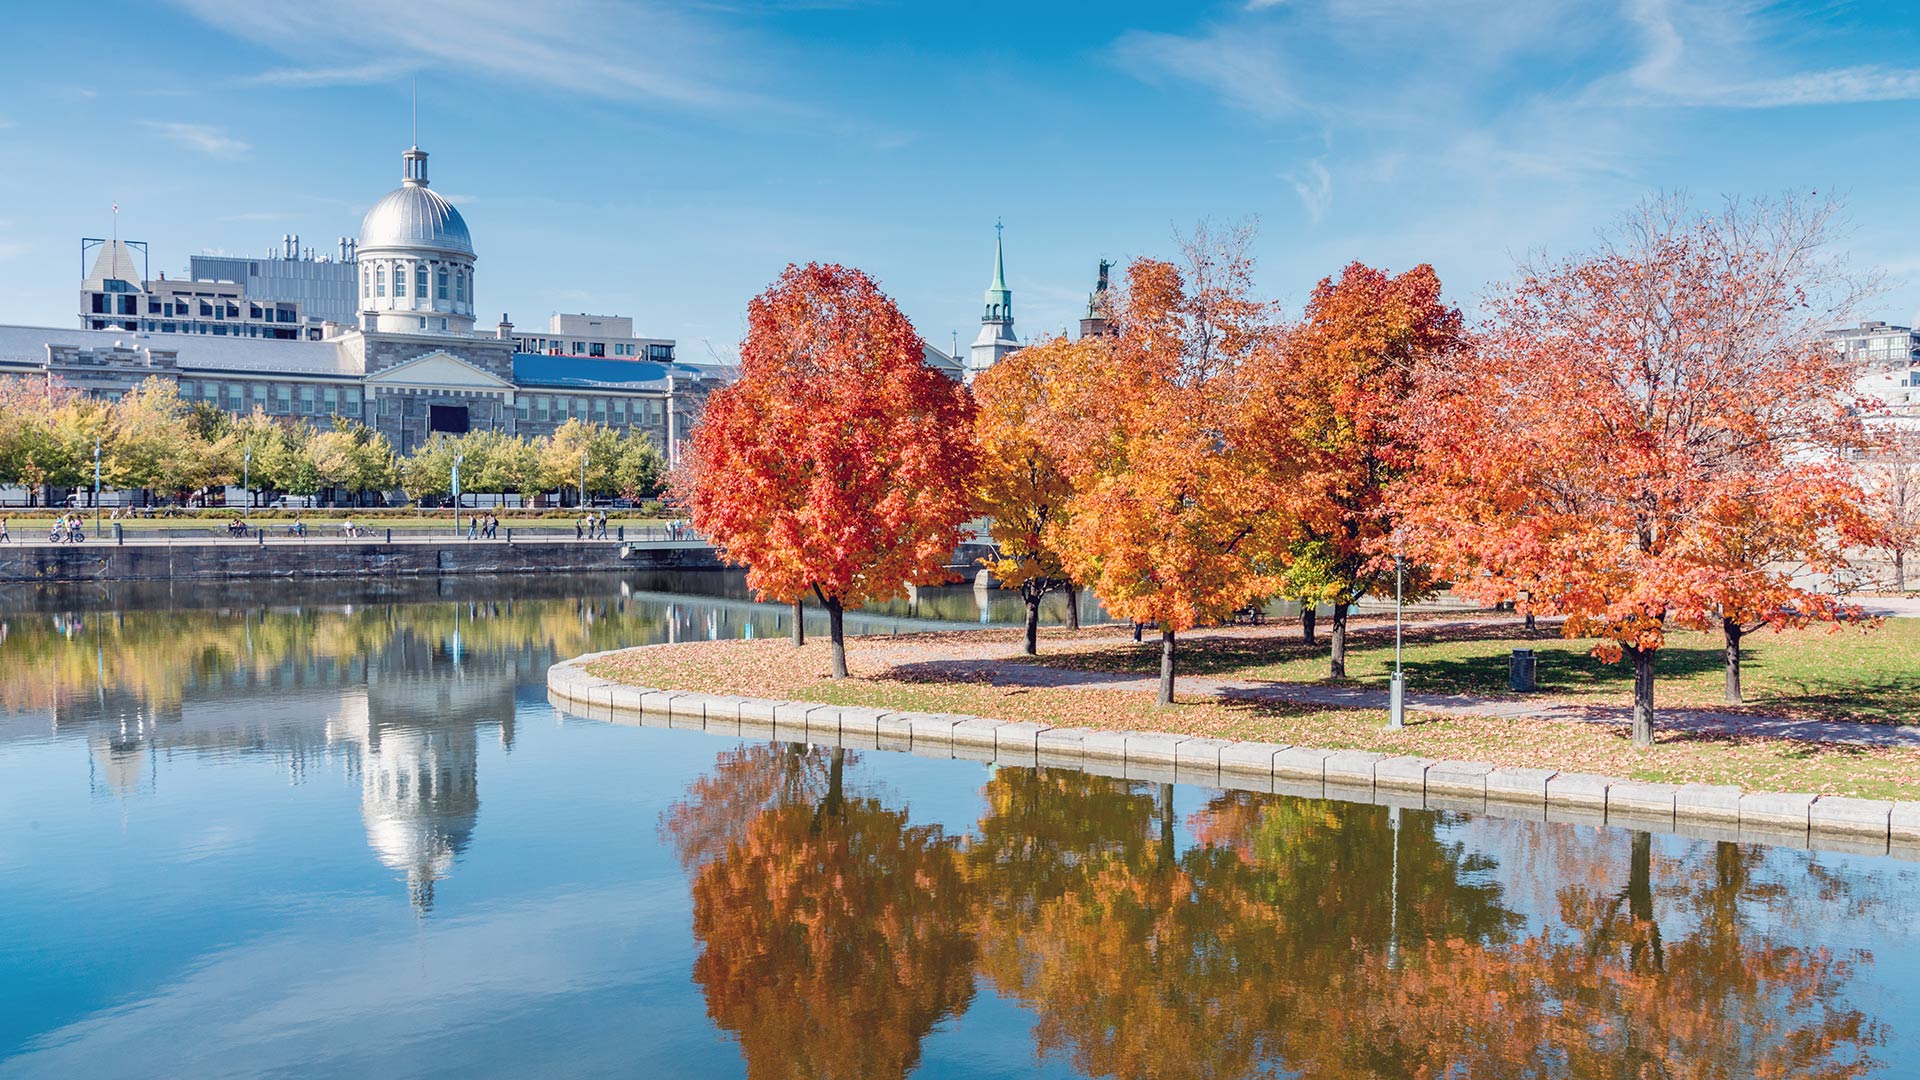 Montreal's Bonsecours Market in the fall